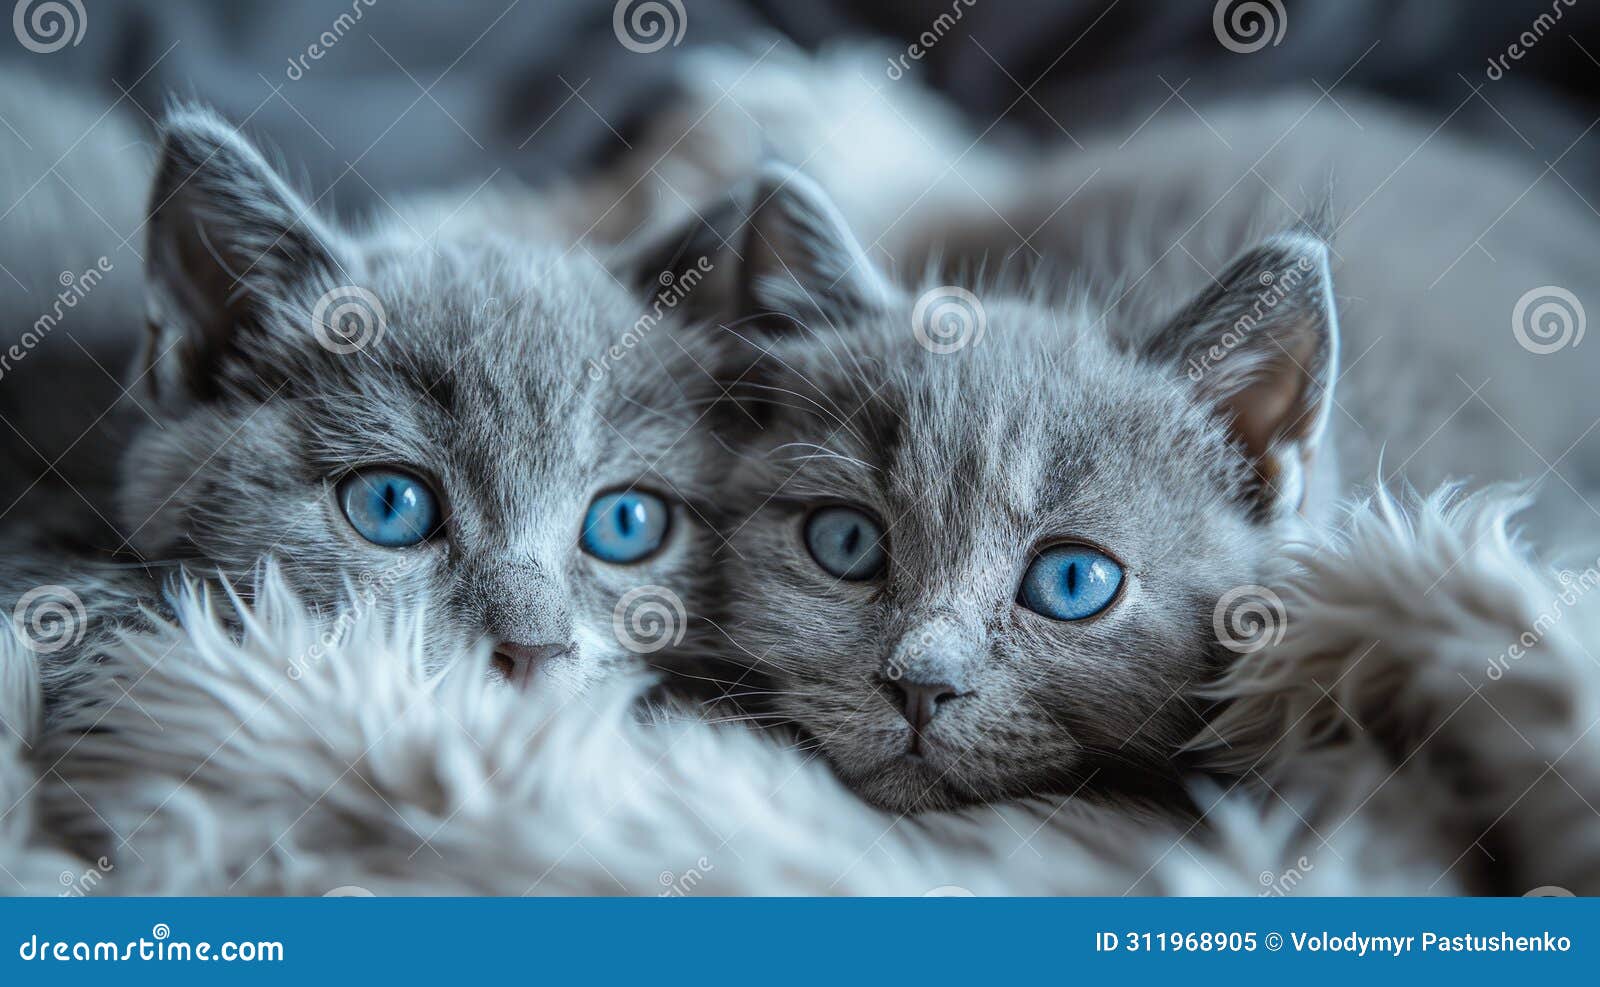 two grey kittens lie next to each other